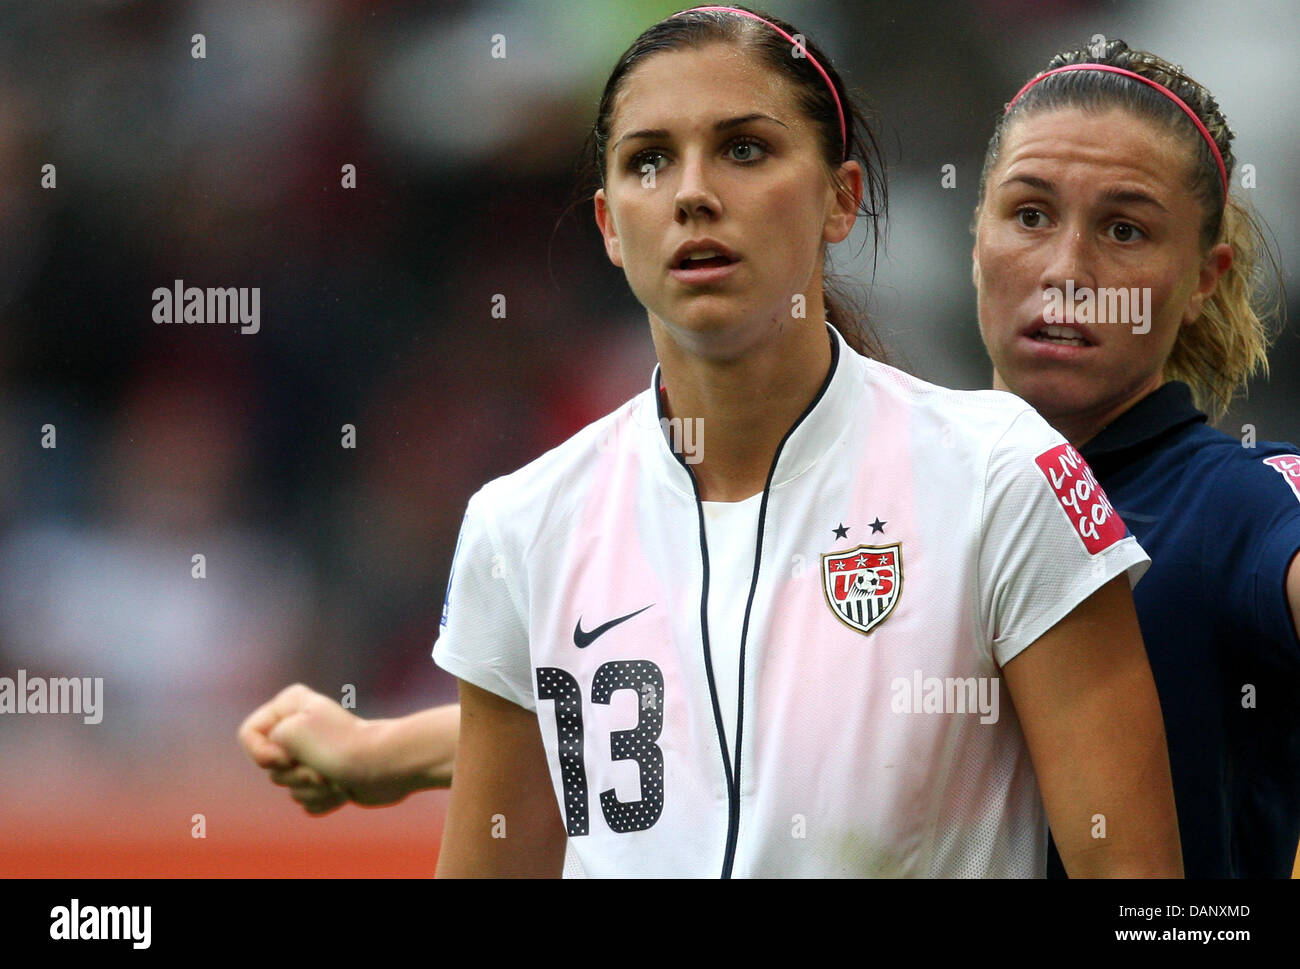 USA's Alex Morgan (L) wears a pinke sports bra during the semi-final soccer match of the FIFA Women's World Cup between France and the USA at the Borussia-Park stadium in Moenchengladbach, Germany, 13 July 2011. USA won the match with 3:1. Photo: Rolf Vennenbernd dpa/lnw  +++(c) dpa - Bildfunk+++ Stock Photo